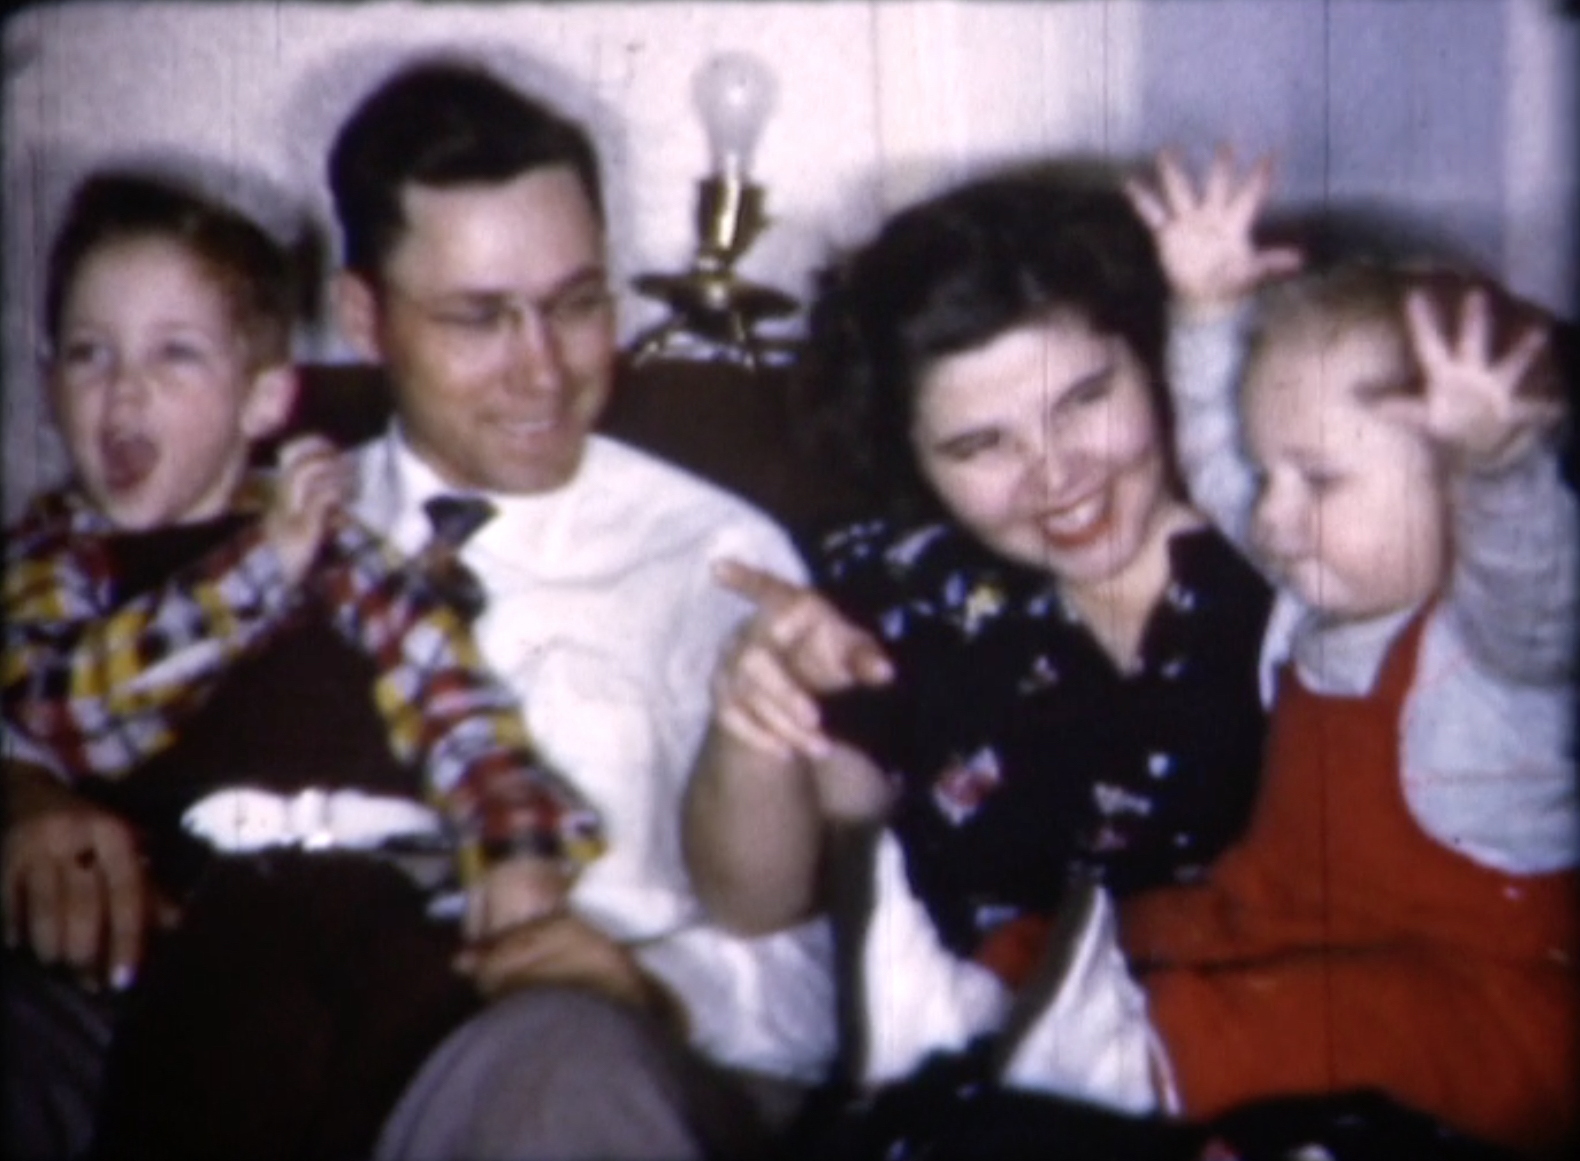 Family gathered on couch, smiling